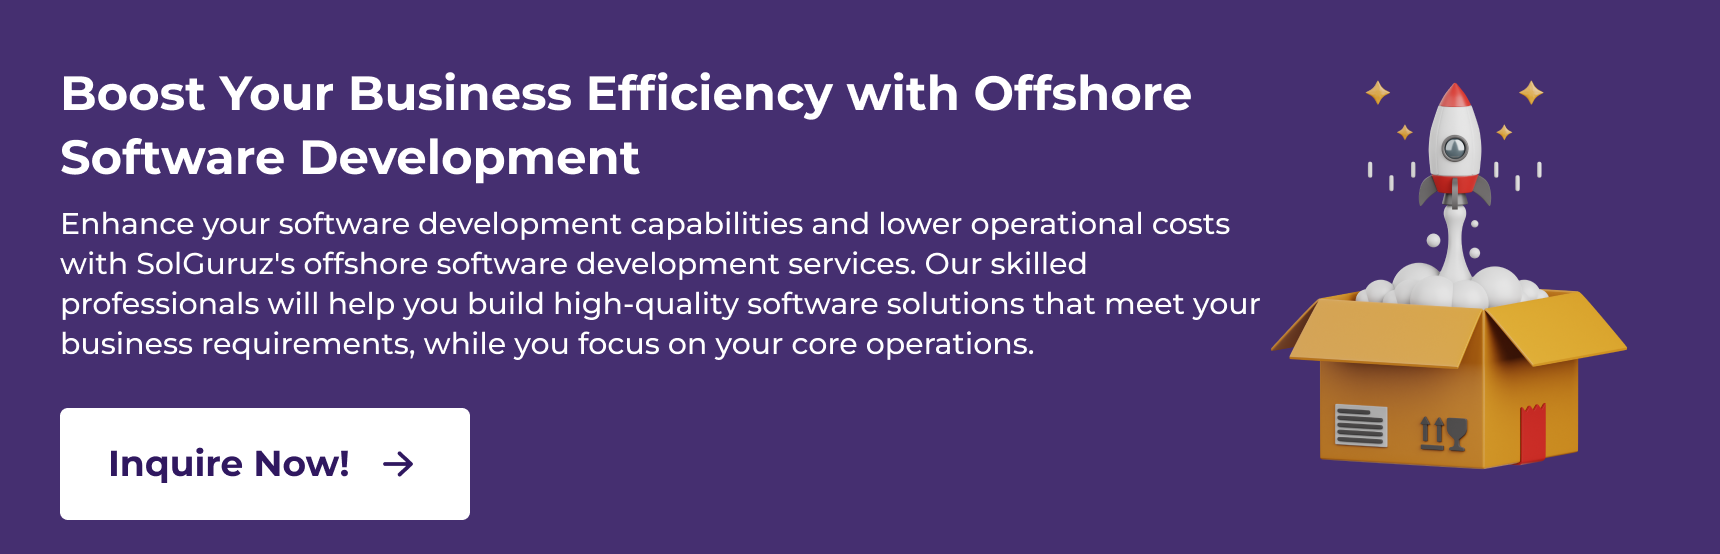 Boost Your Business Efficiency with Offshore Software Development Services